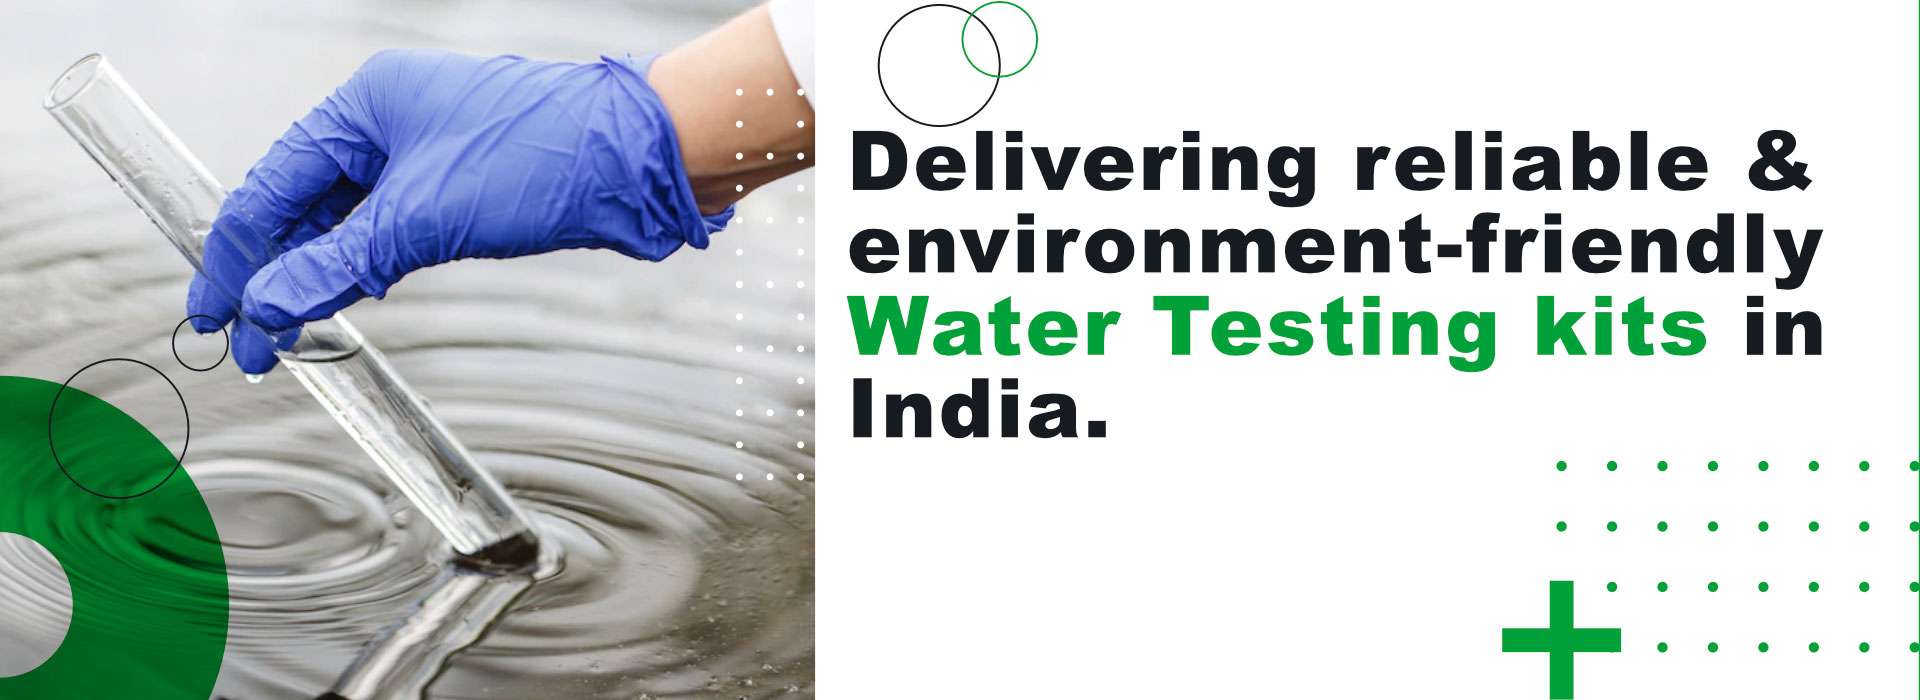  Delivering reliable & environment-friendly water Testing kits in India Manufacturers in Ajmer